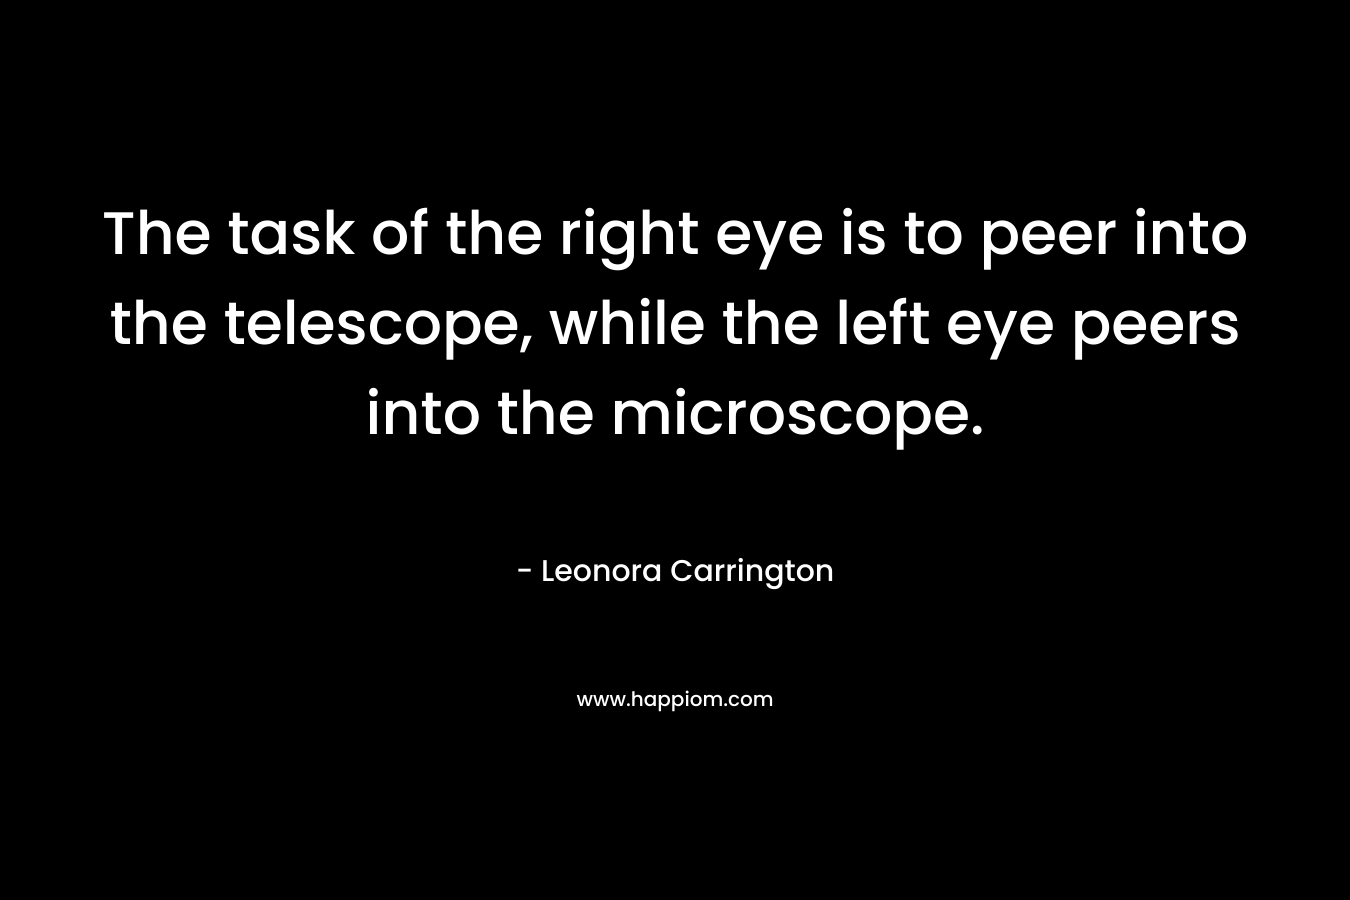 The task of the right eye is to peer into the telescope, while the left eye peers into the microscope. – Leonora Carrington